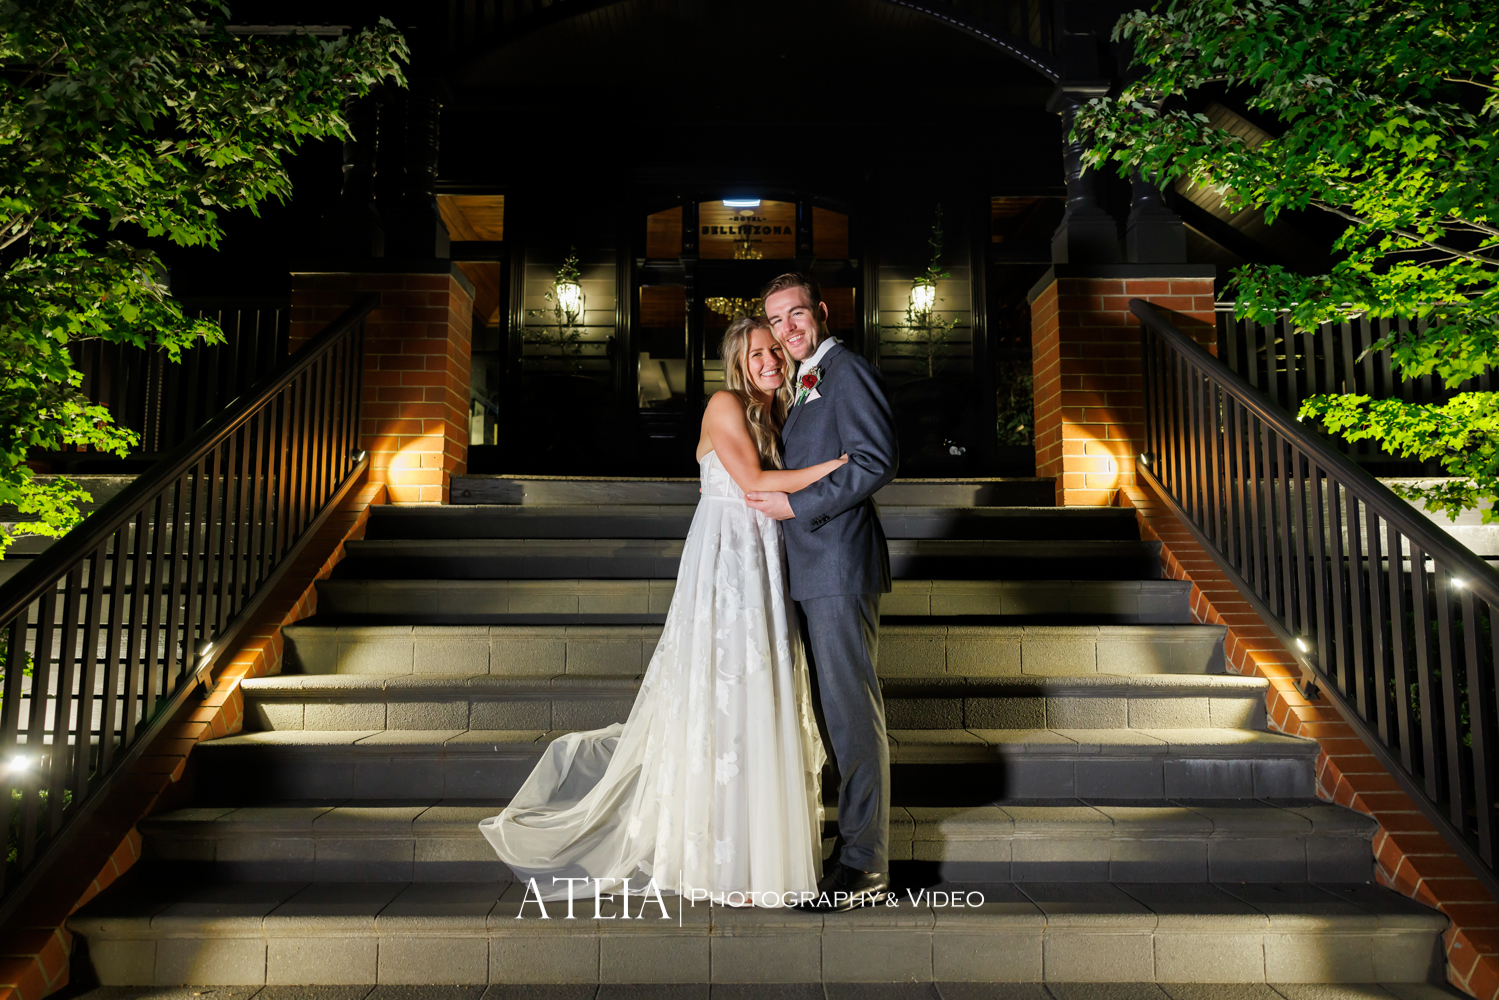 , Alex and Mitchell&#8217;s wedding at Hotel Bellinzona in Hepburn Springs by ATEIA Photography &#038; Video